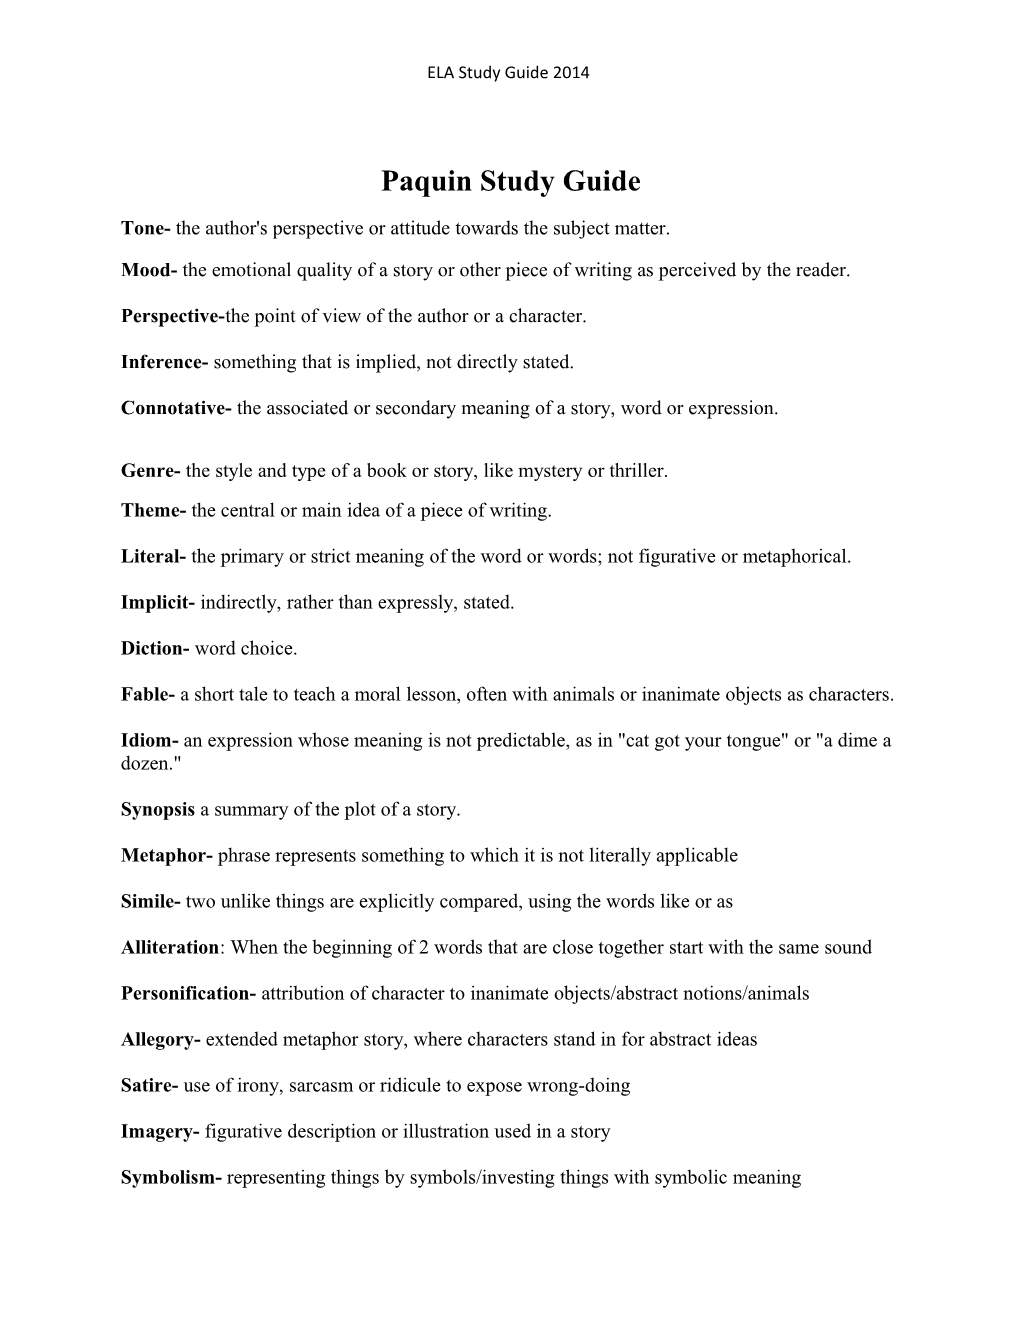 Paquin Study Guide